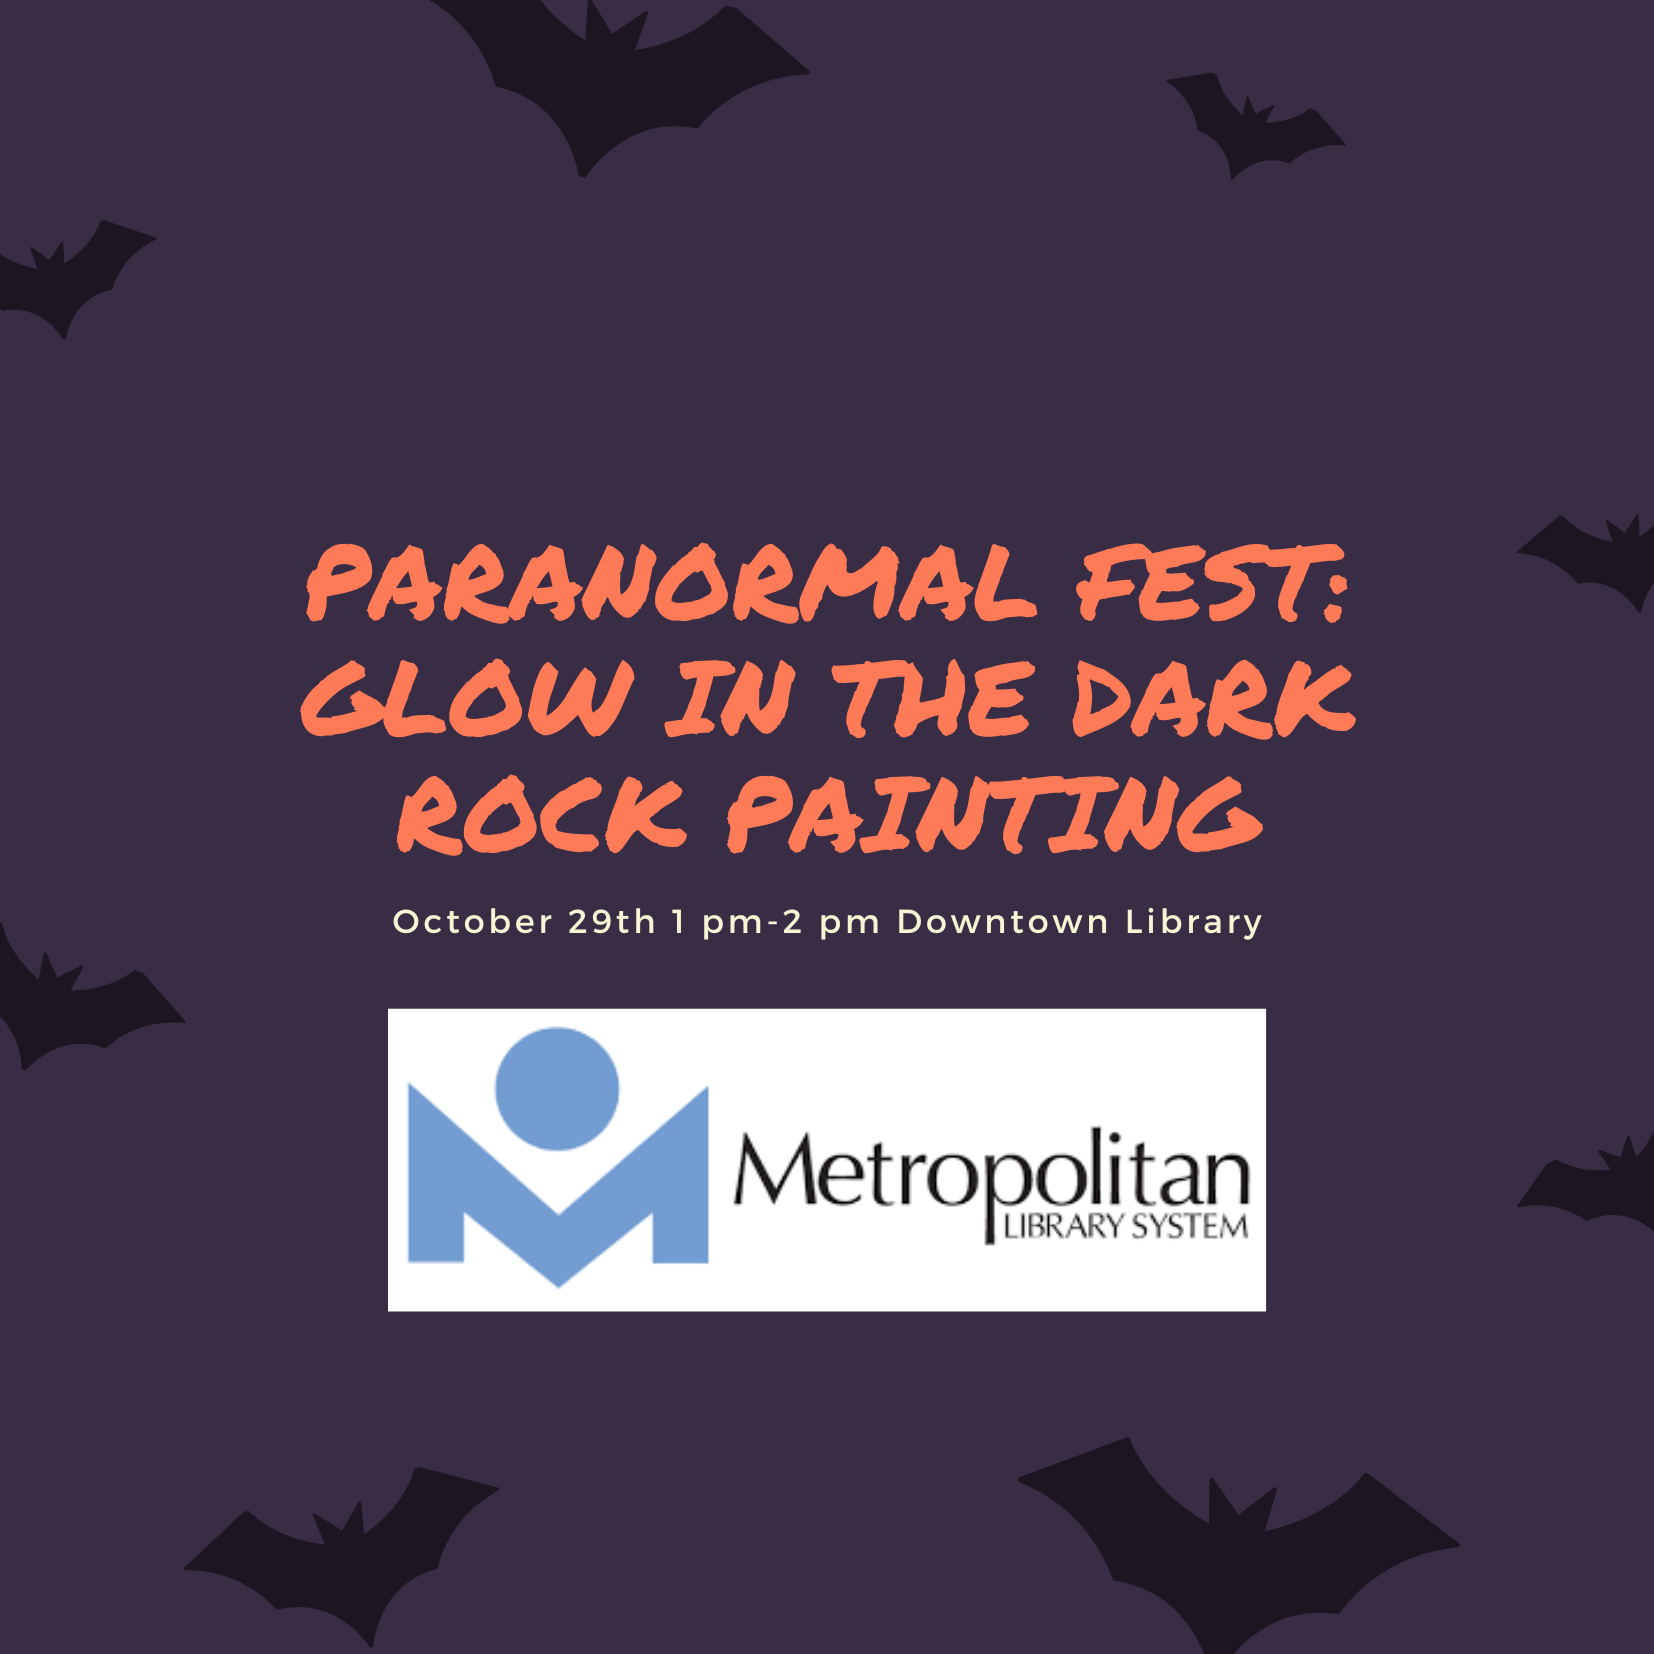 Paranormal Fest: Glow in the Dark Rock Painting followed by MLS logo